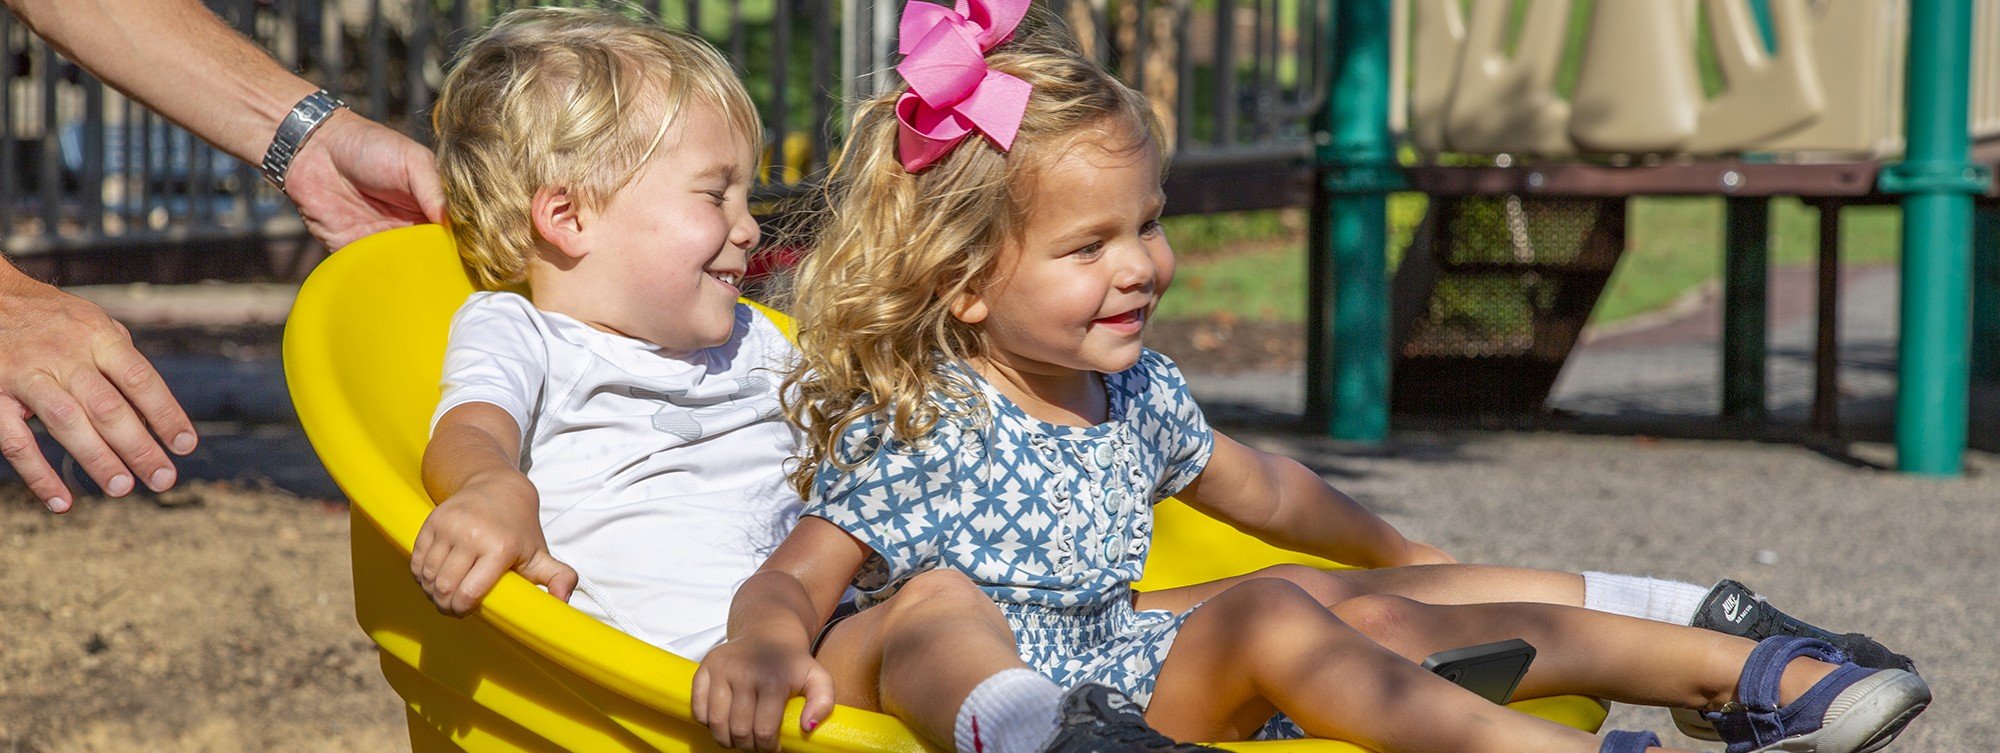 Featured image of 2 children smiling going down yellow slide